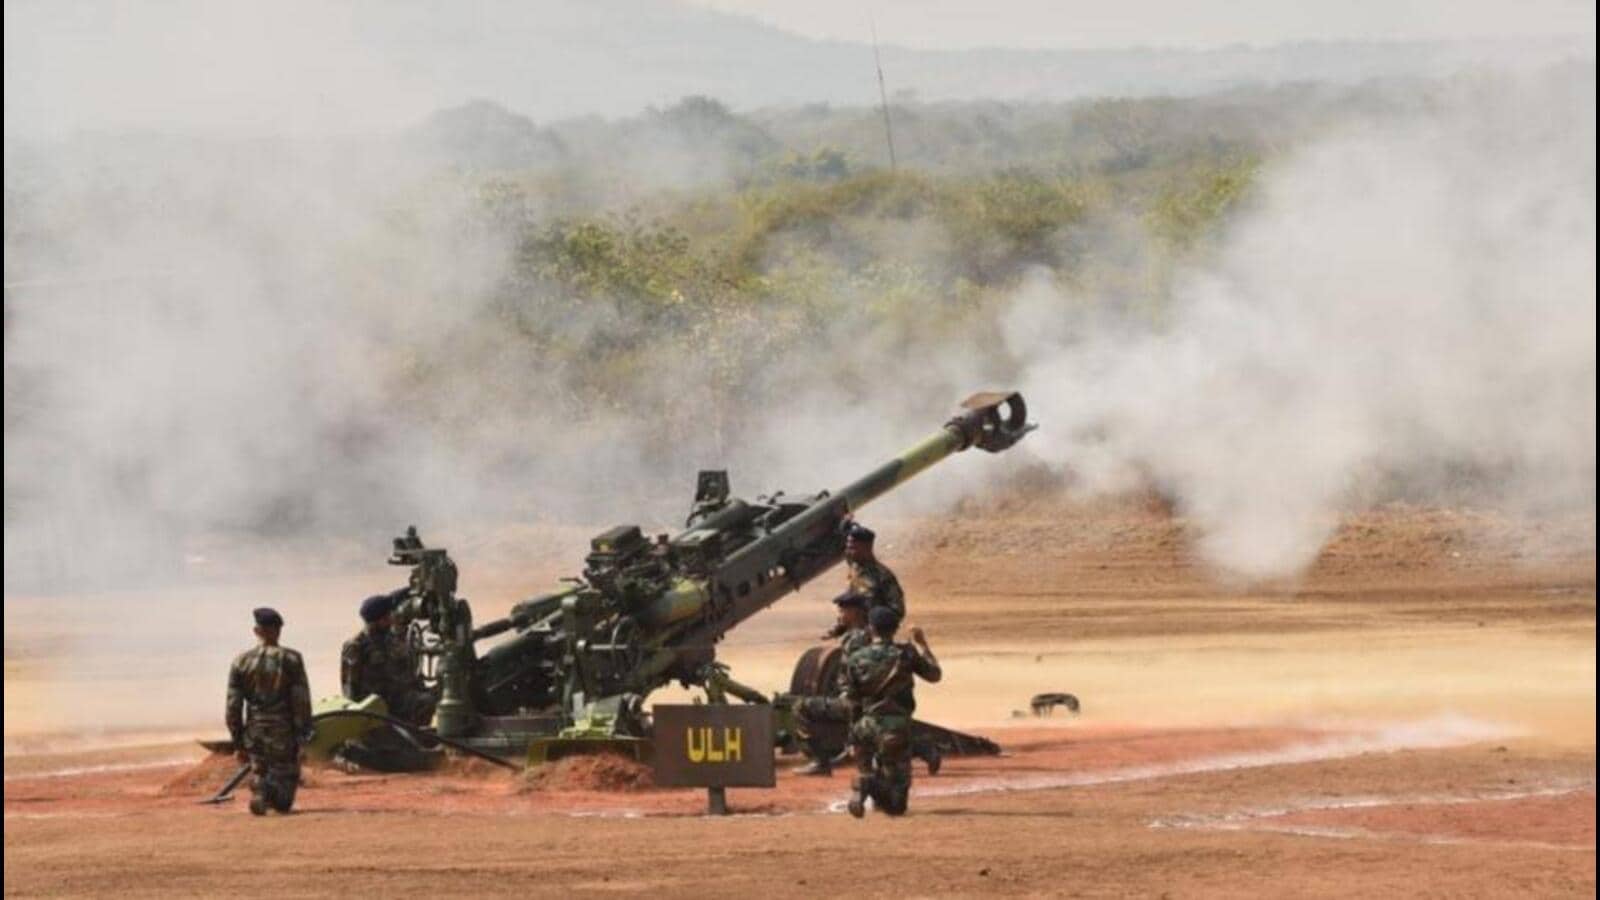 Indian Army puts up imposing firepower display with indigenous artillery guns | Latest News India - Hindustan Times